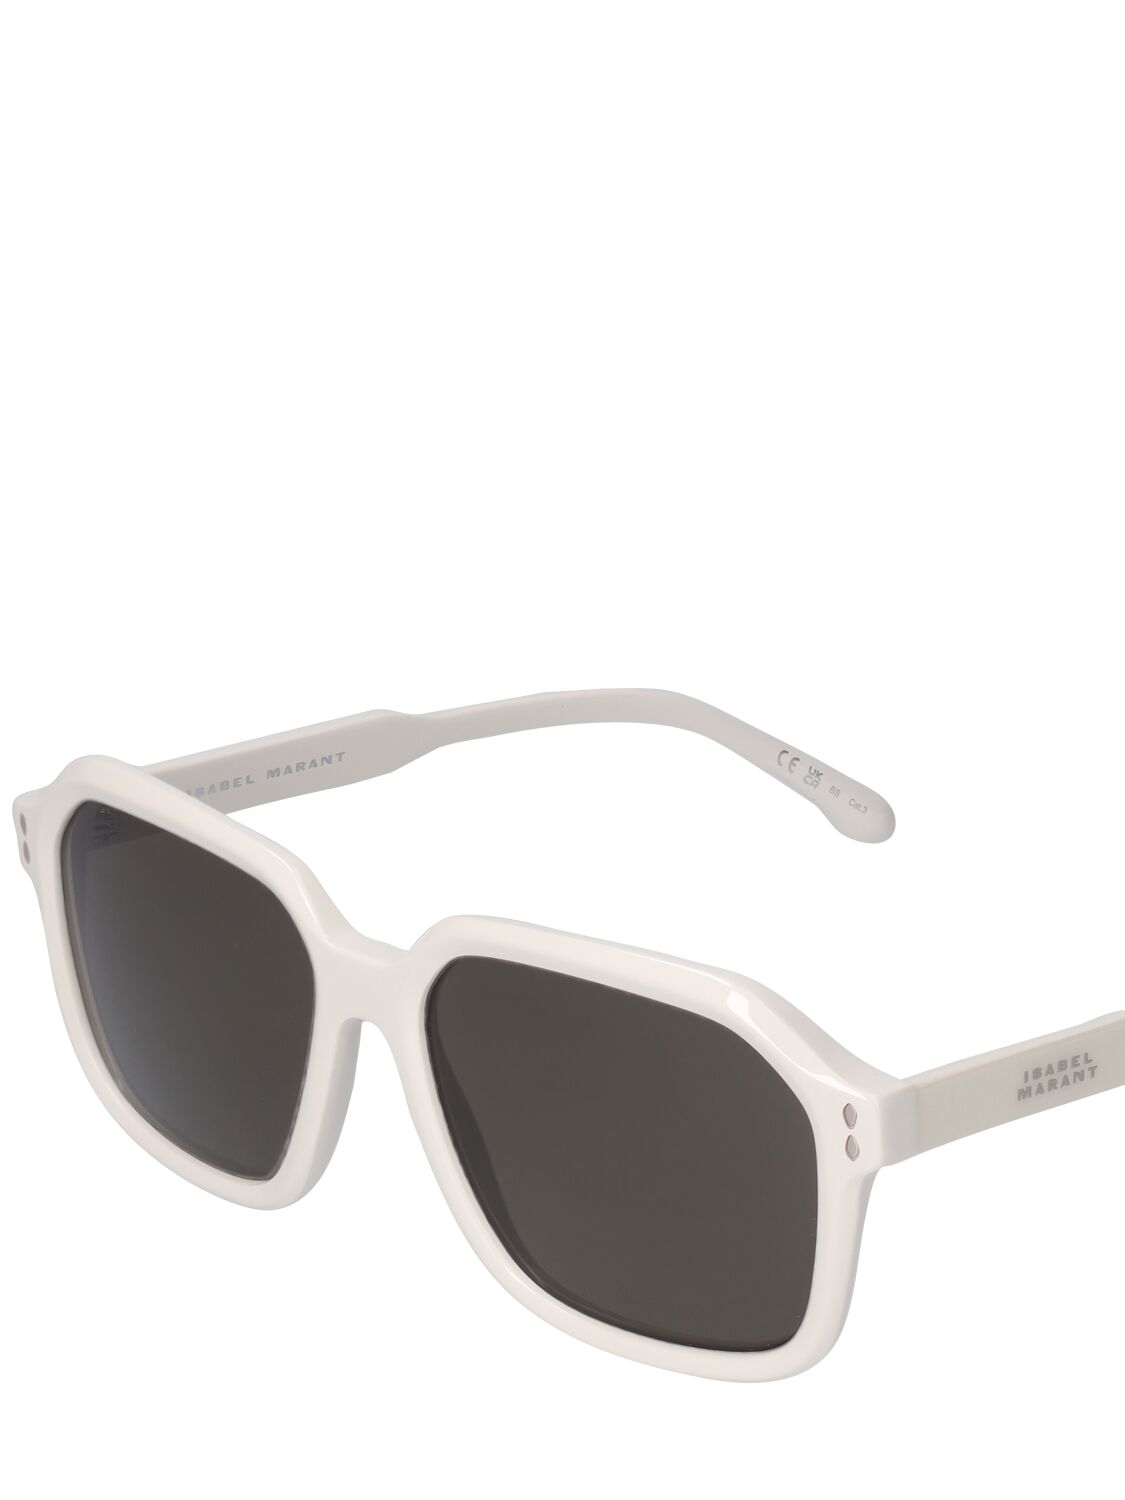 Shop Isabel Marant The In Love Classic Acetate Sunglasses In White,grey